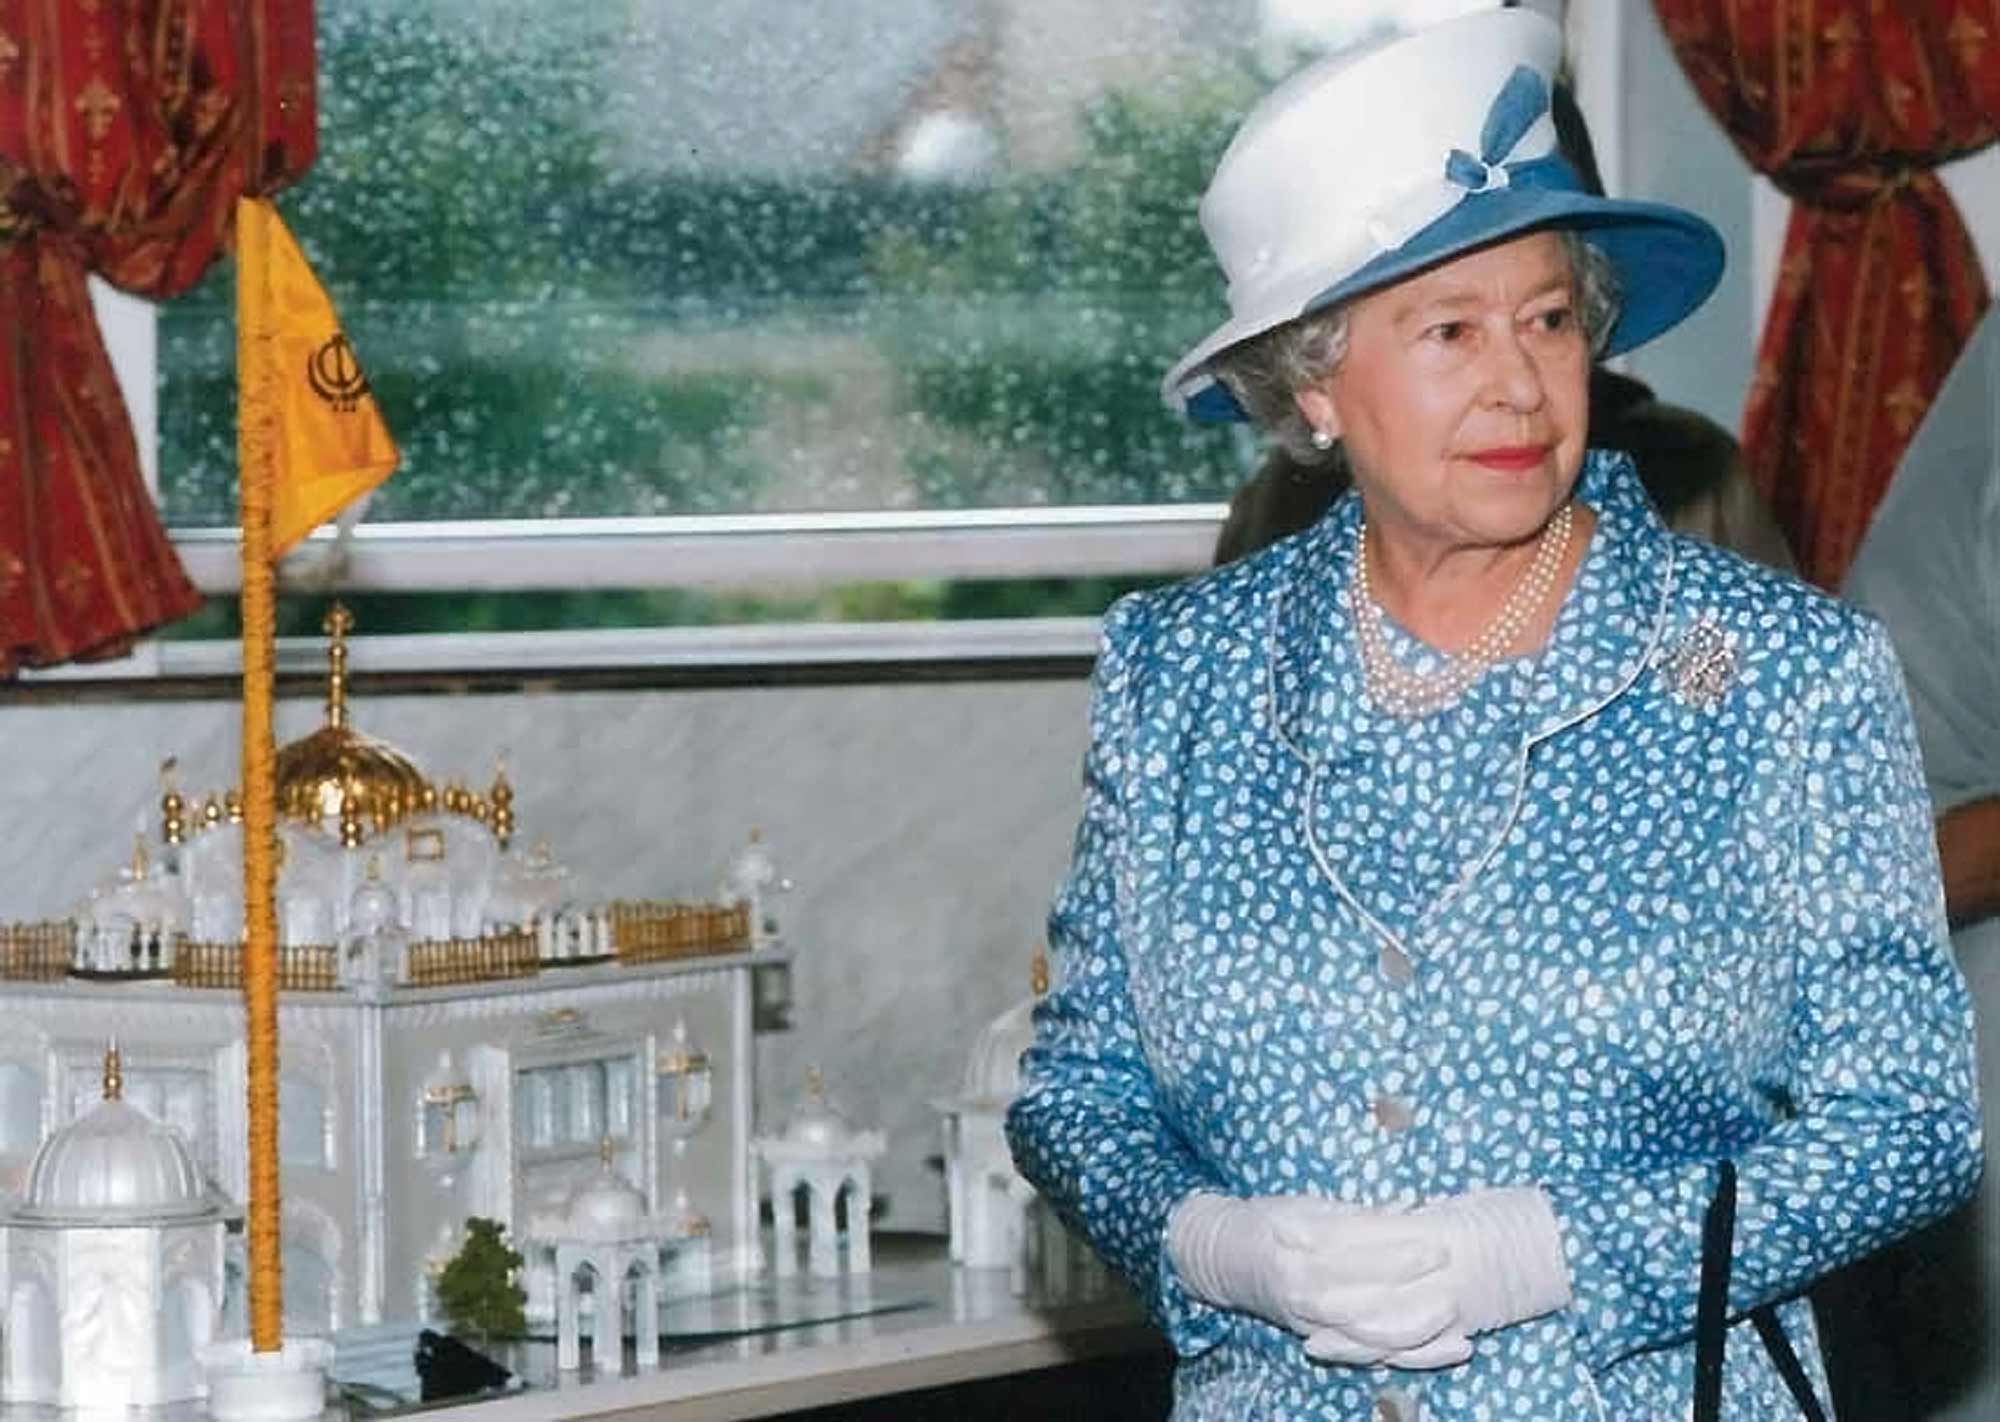 The Queen visited the Gurdwara in 2002 - Gurdwara picture archive